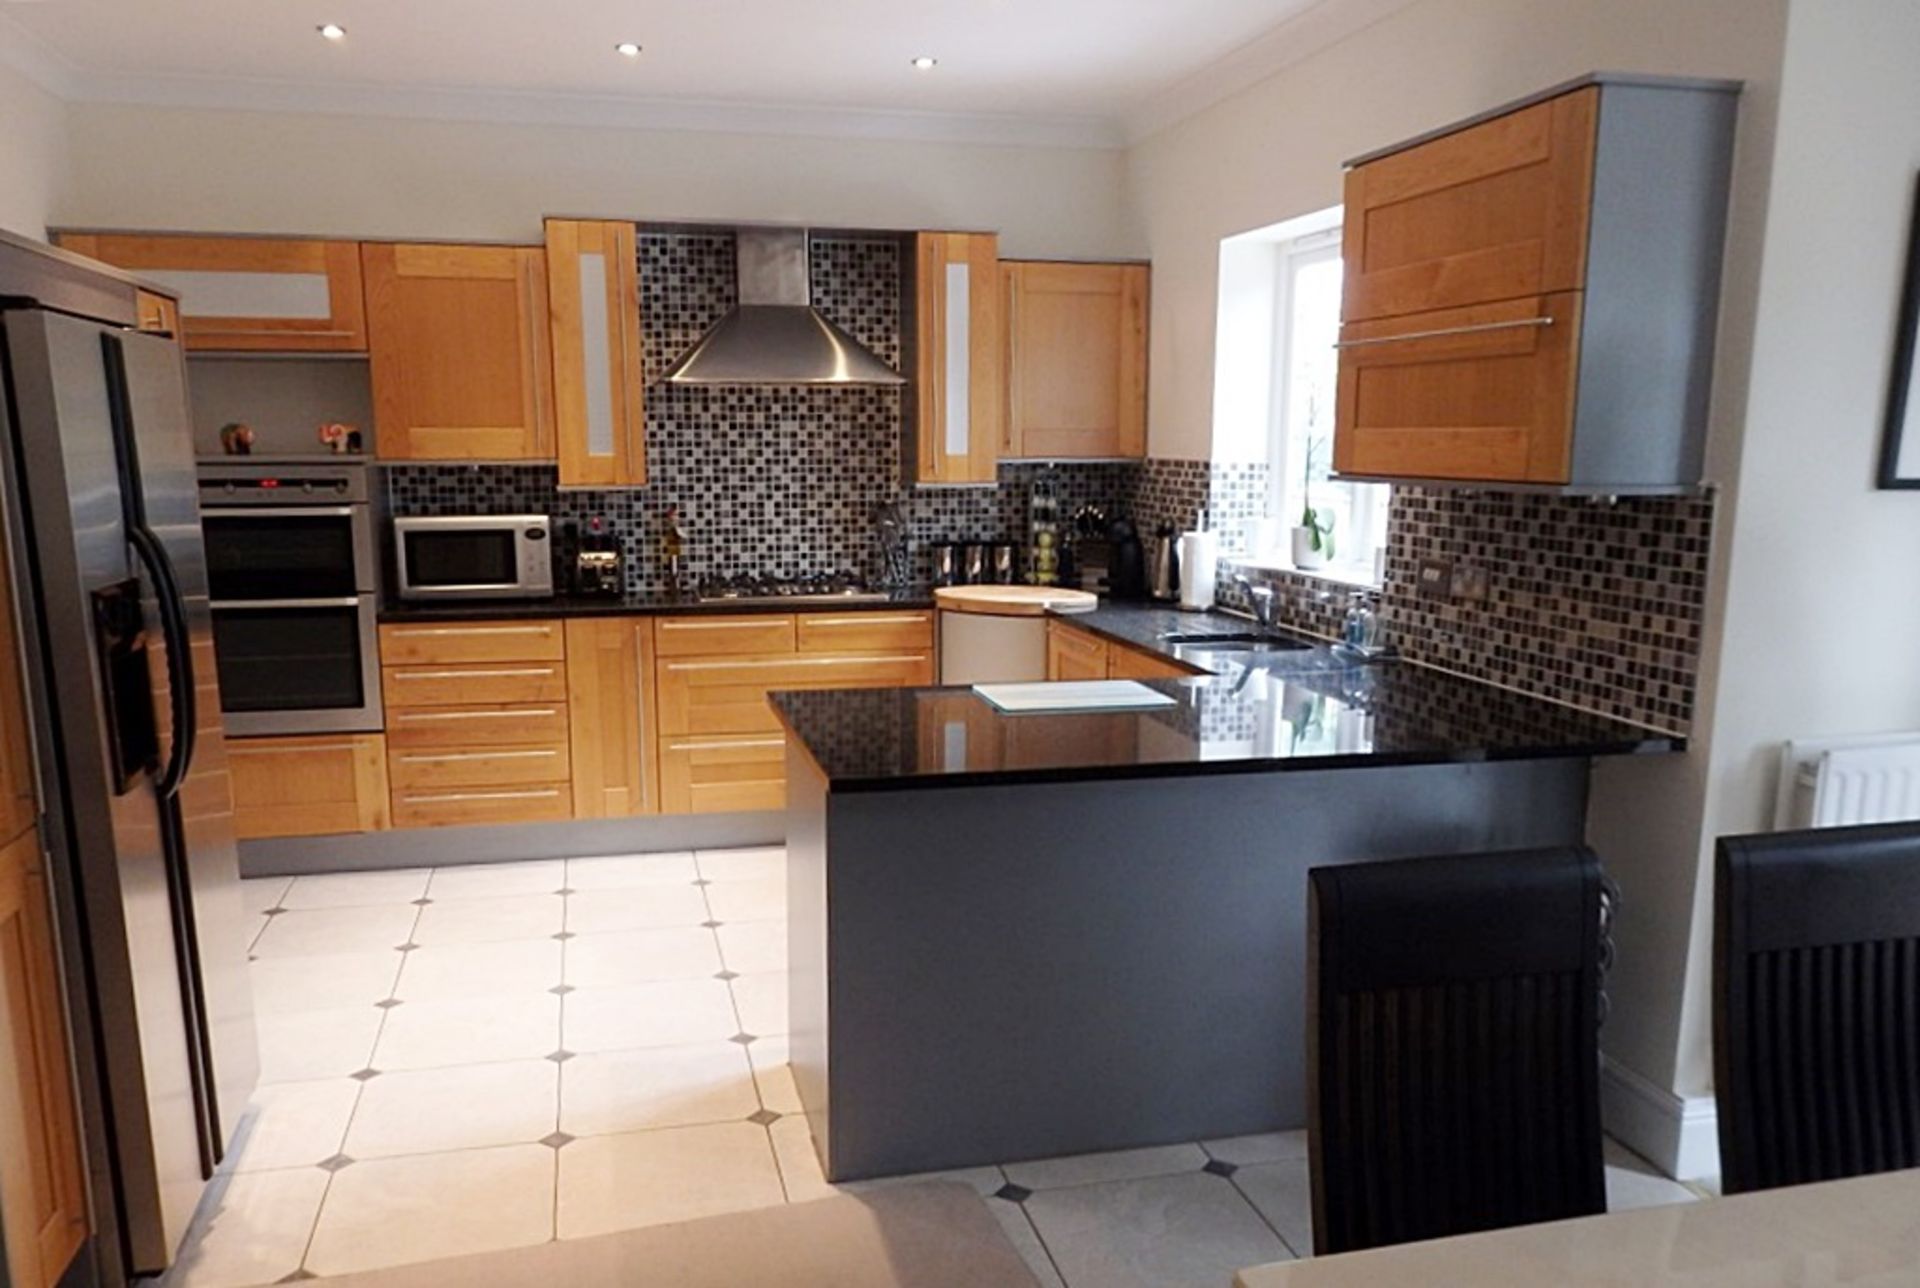 1 x Solid Wood Fitted Kitchen By Panorama - Features Luxurious Black Granite Worktops, Integrated - Image 16 of 31